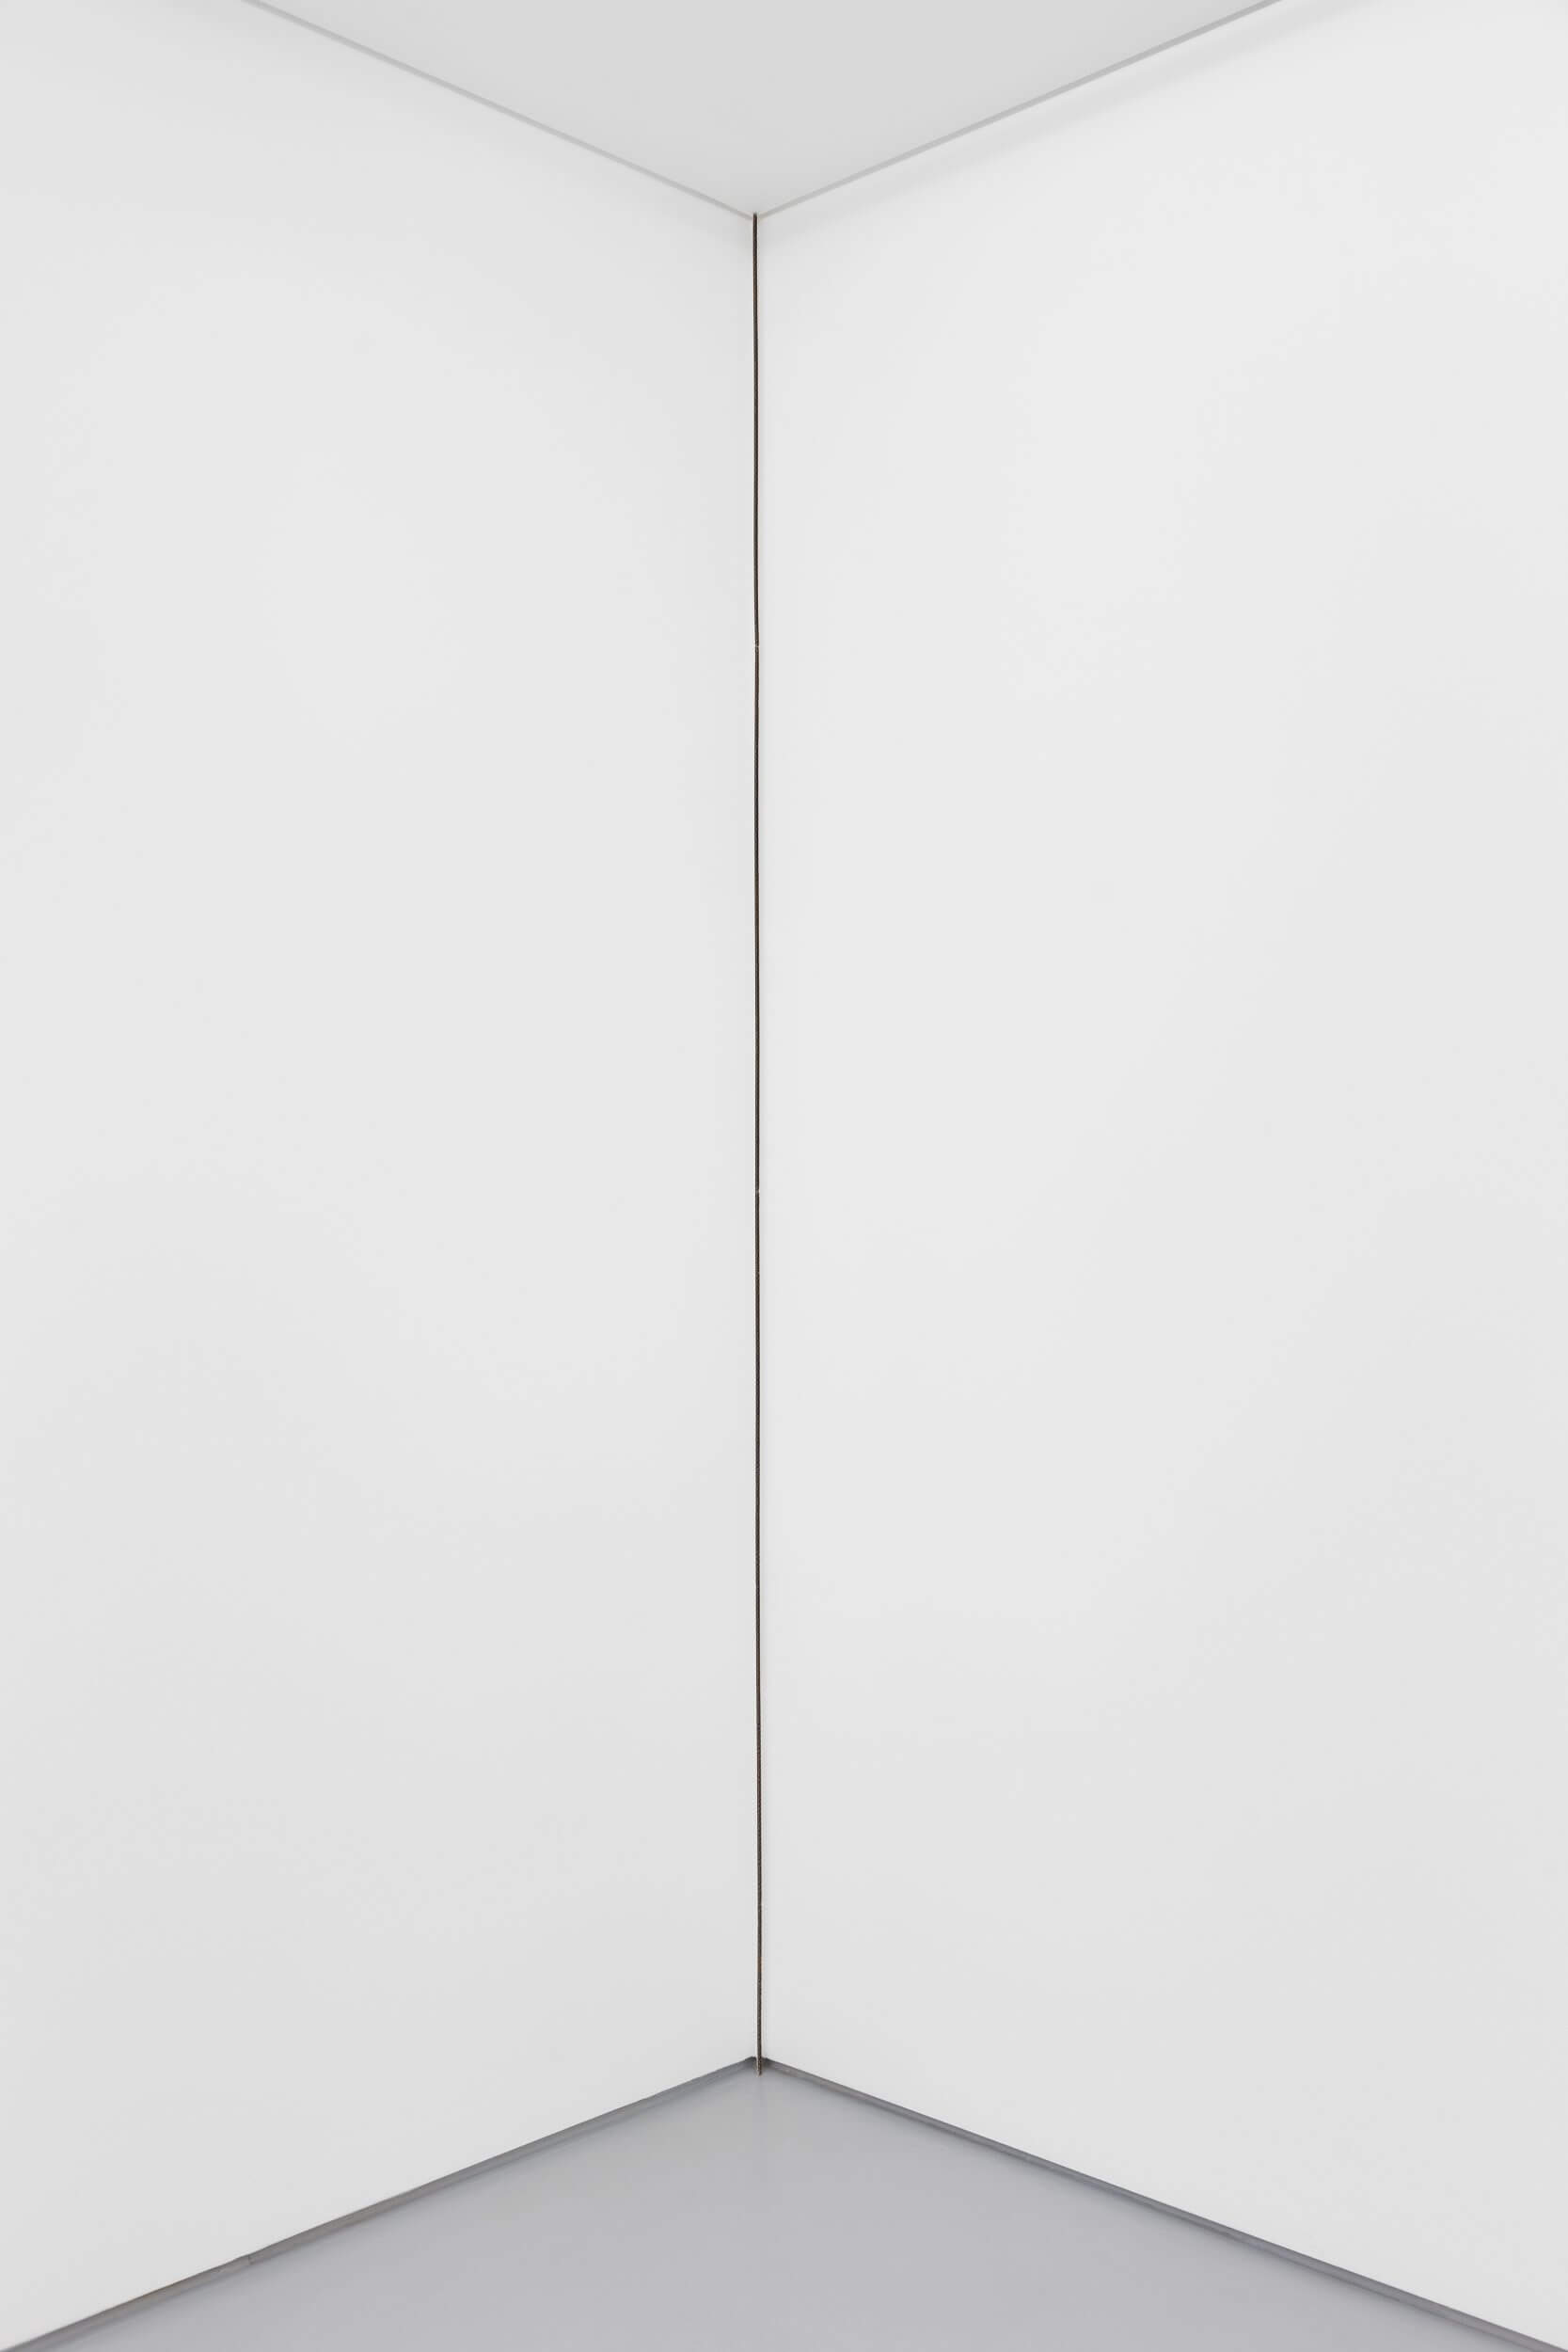 Carlos Bunga, Linha (vertical), 2017 (2021). Latex and glue on carboard and wall. 286,5 x 0,8 x 3 cm
